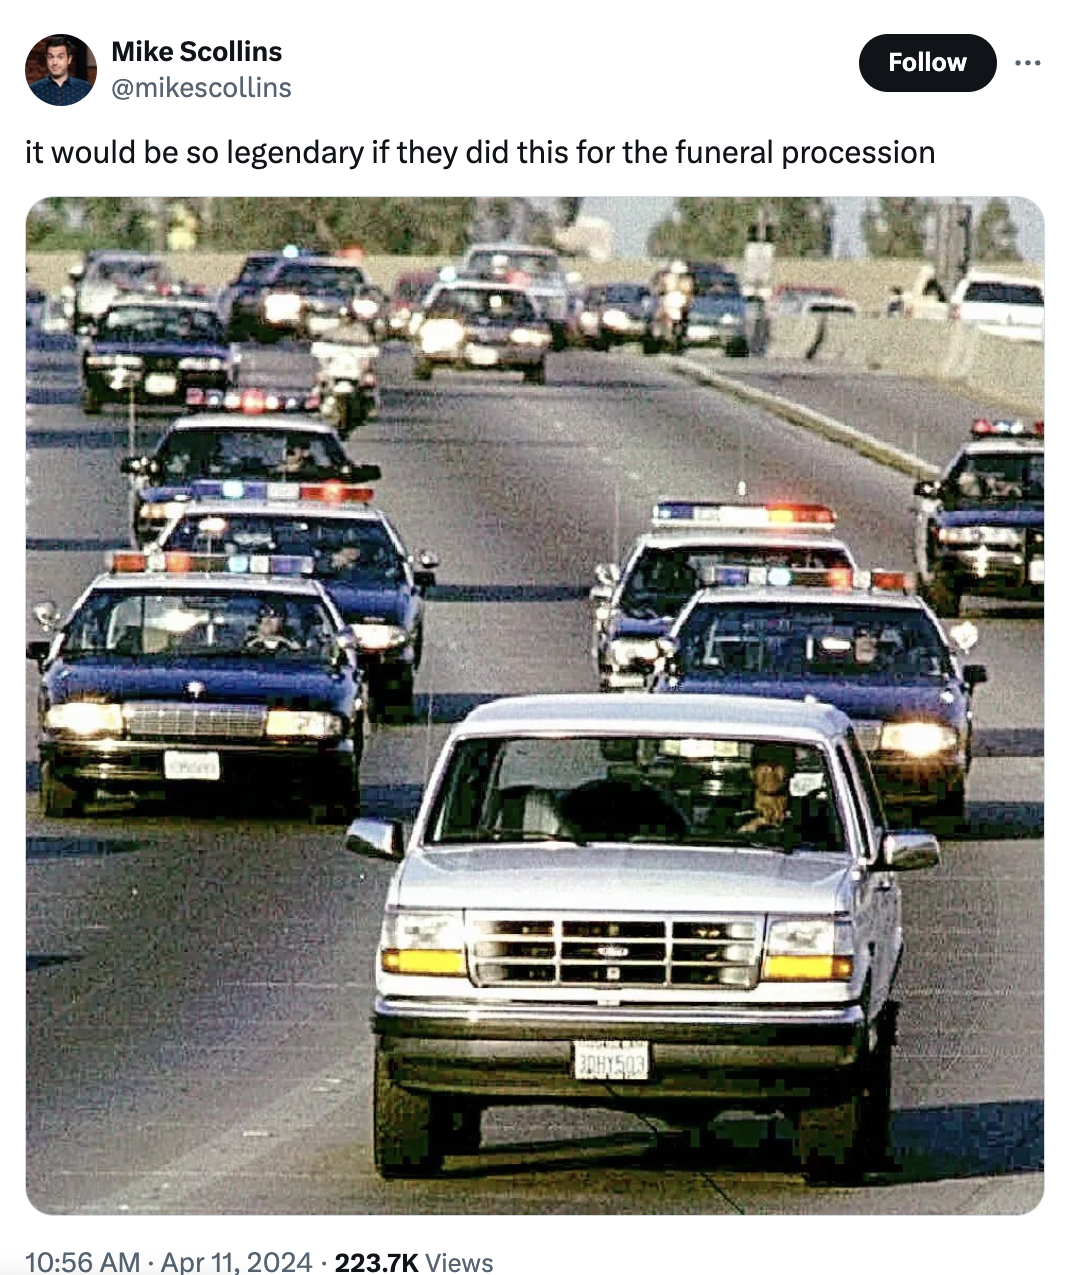 oj simpson chase - Mike Scollins it would be so legendary if they did this for the funeral procession Views